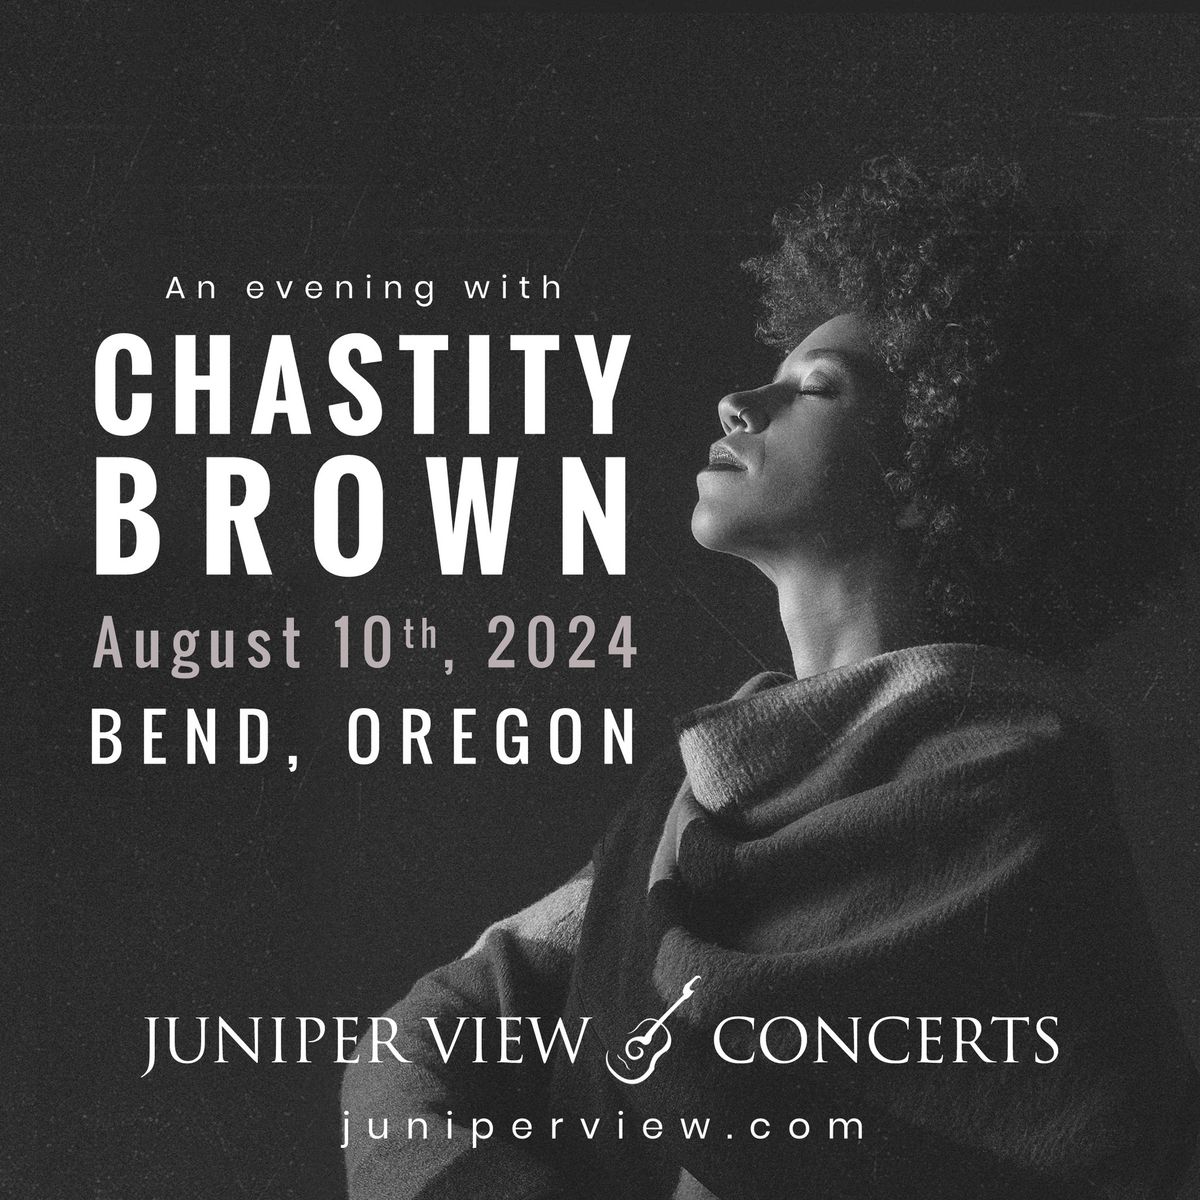 An evening with Chastity Brown